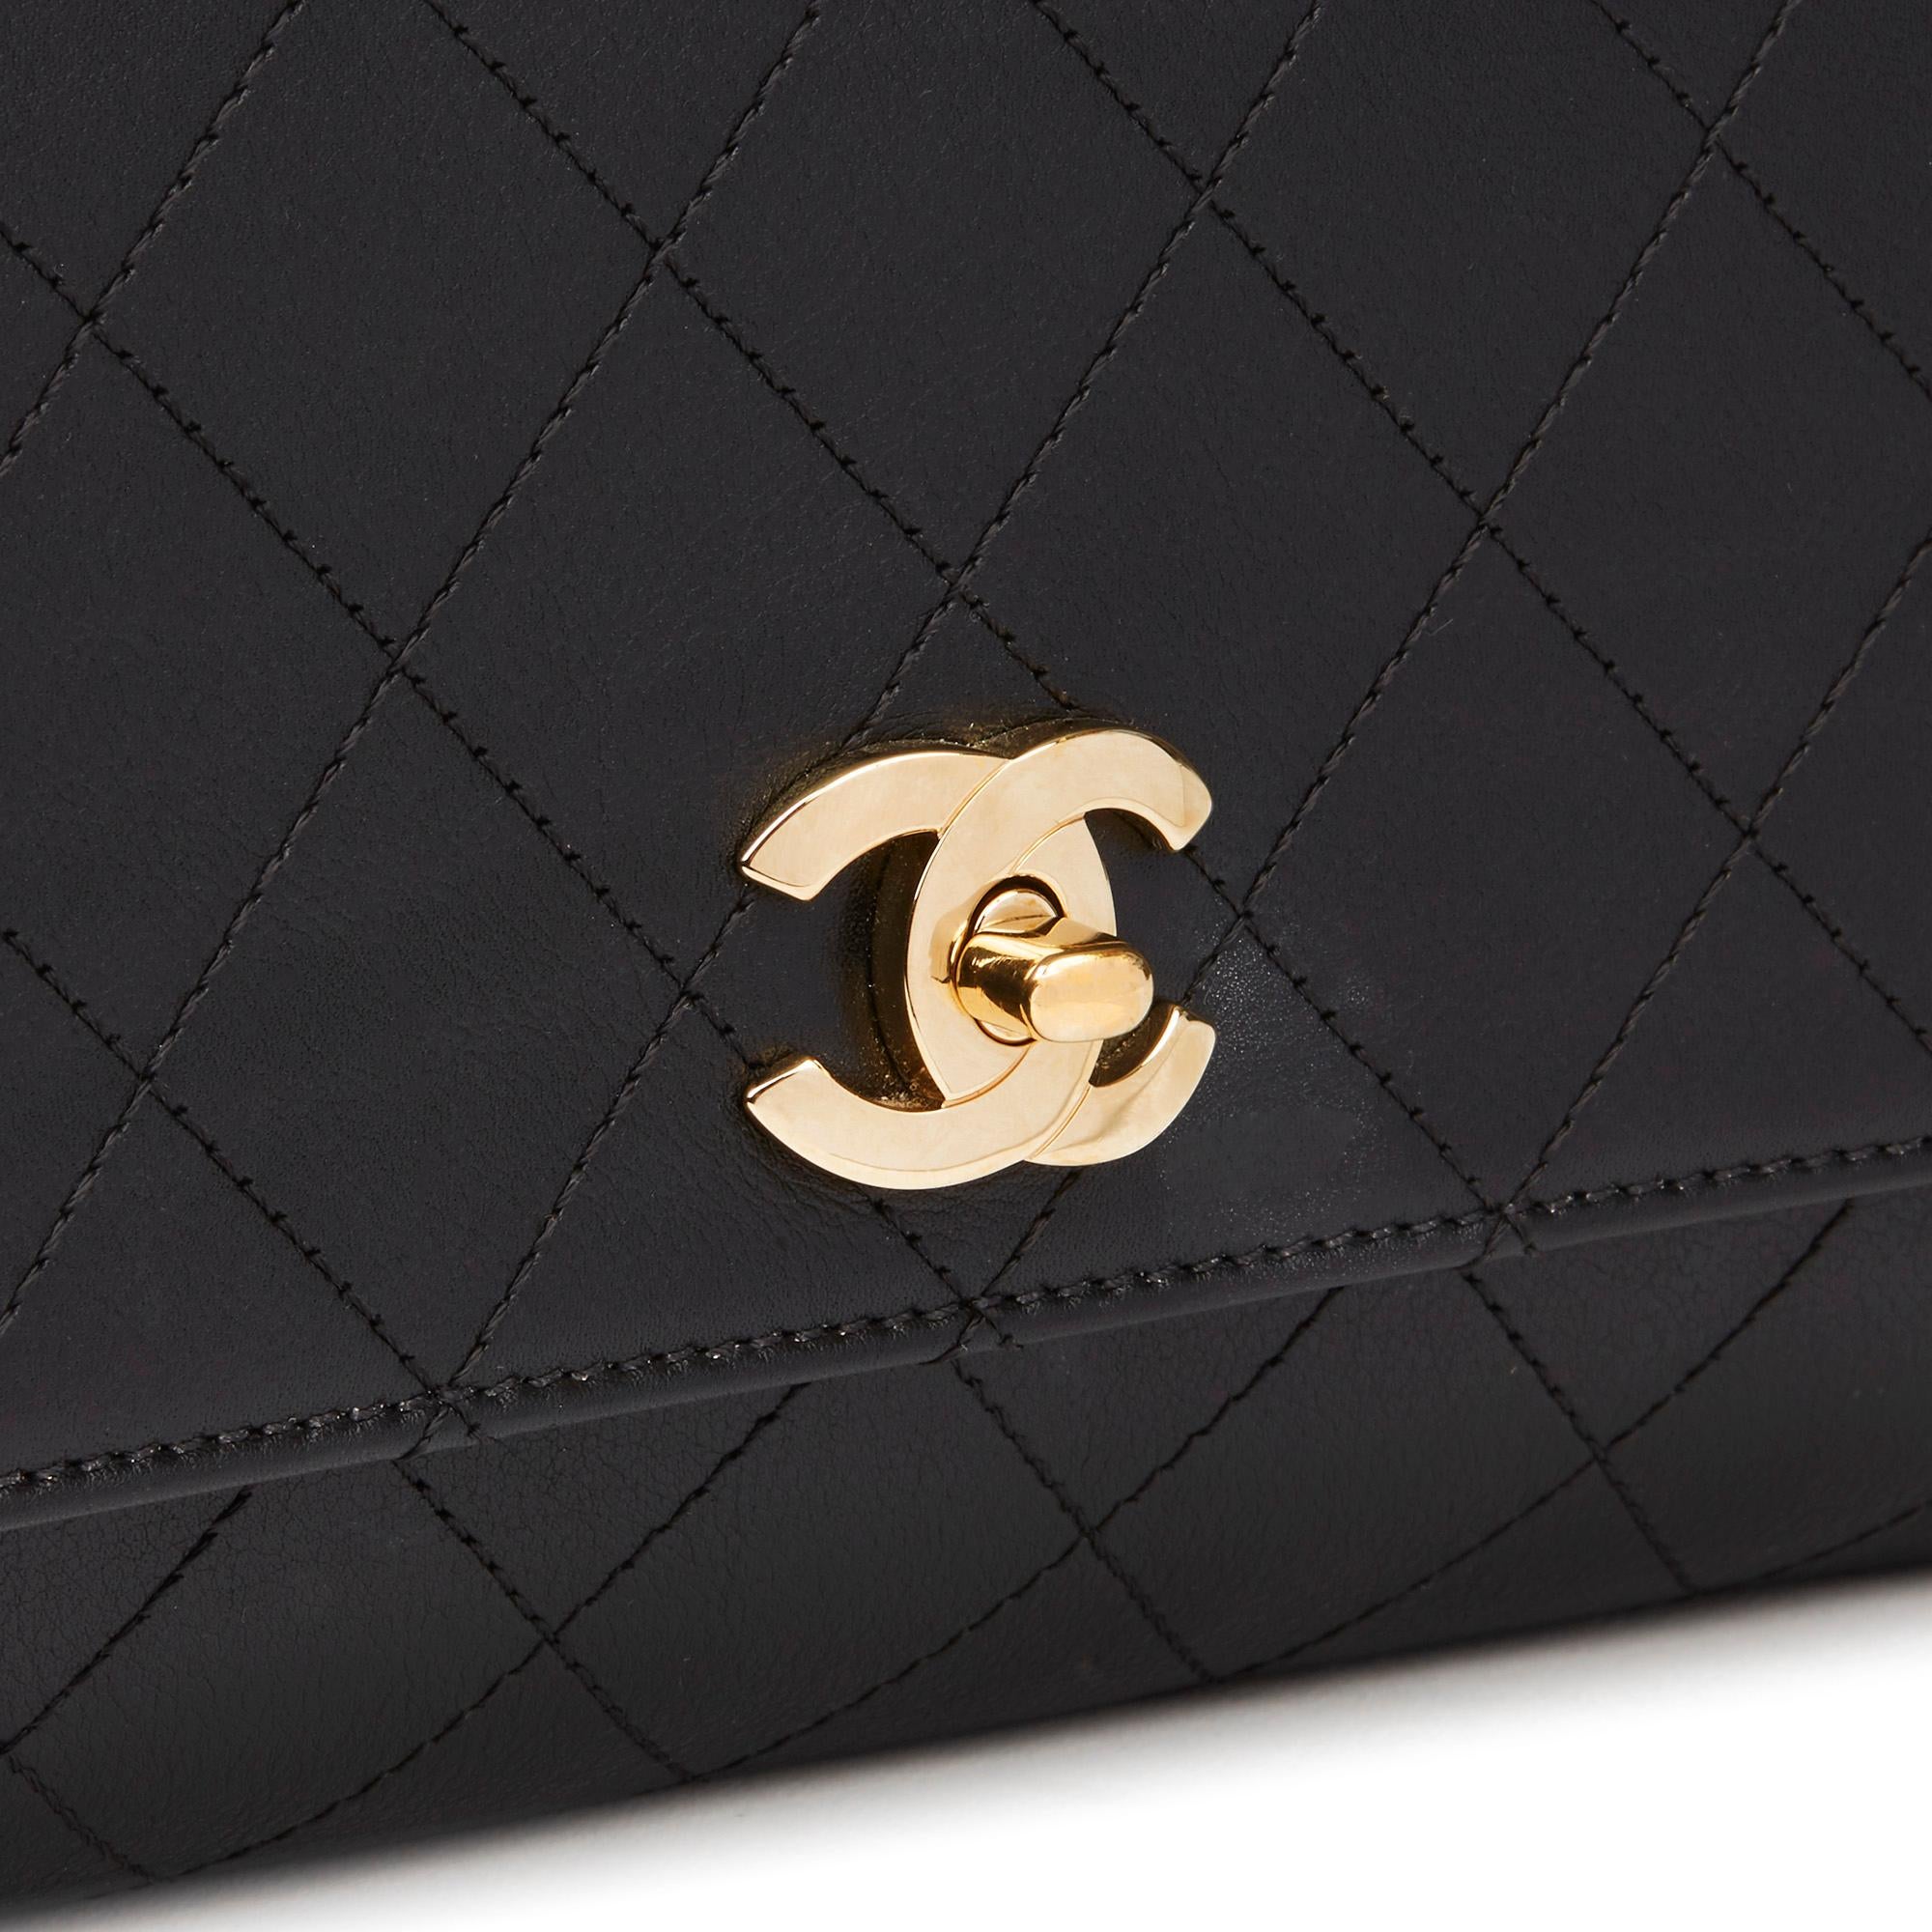 Women's 2019 Chanel Black Quilted Calfskin Leather Classic Top Handle Shoulder Bag